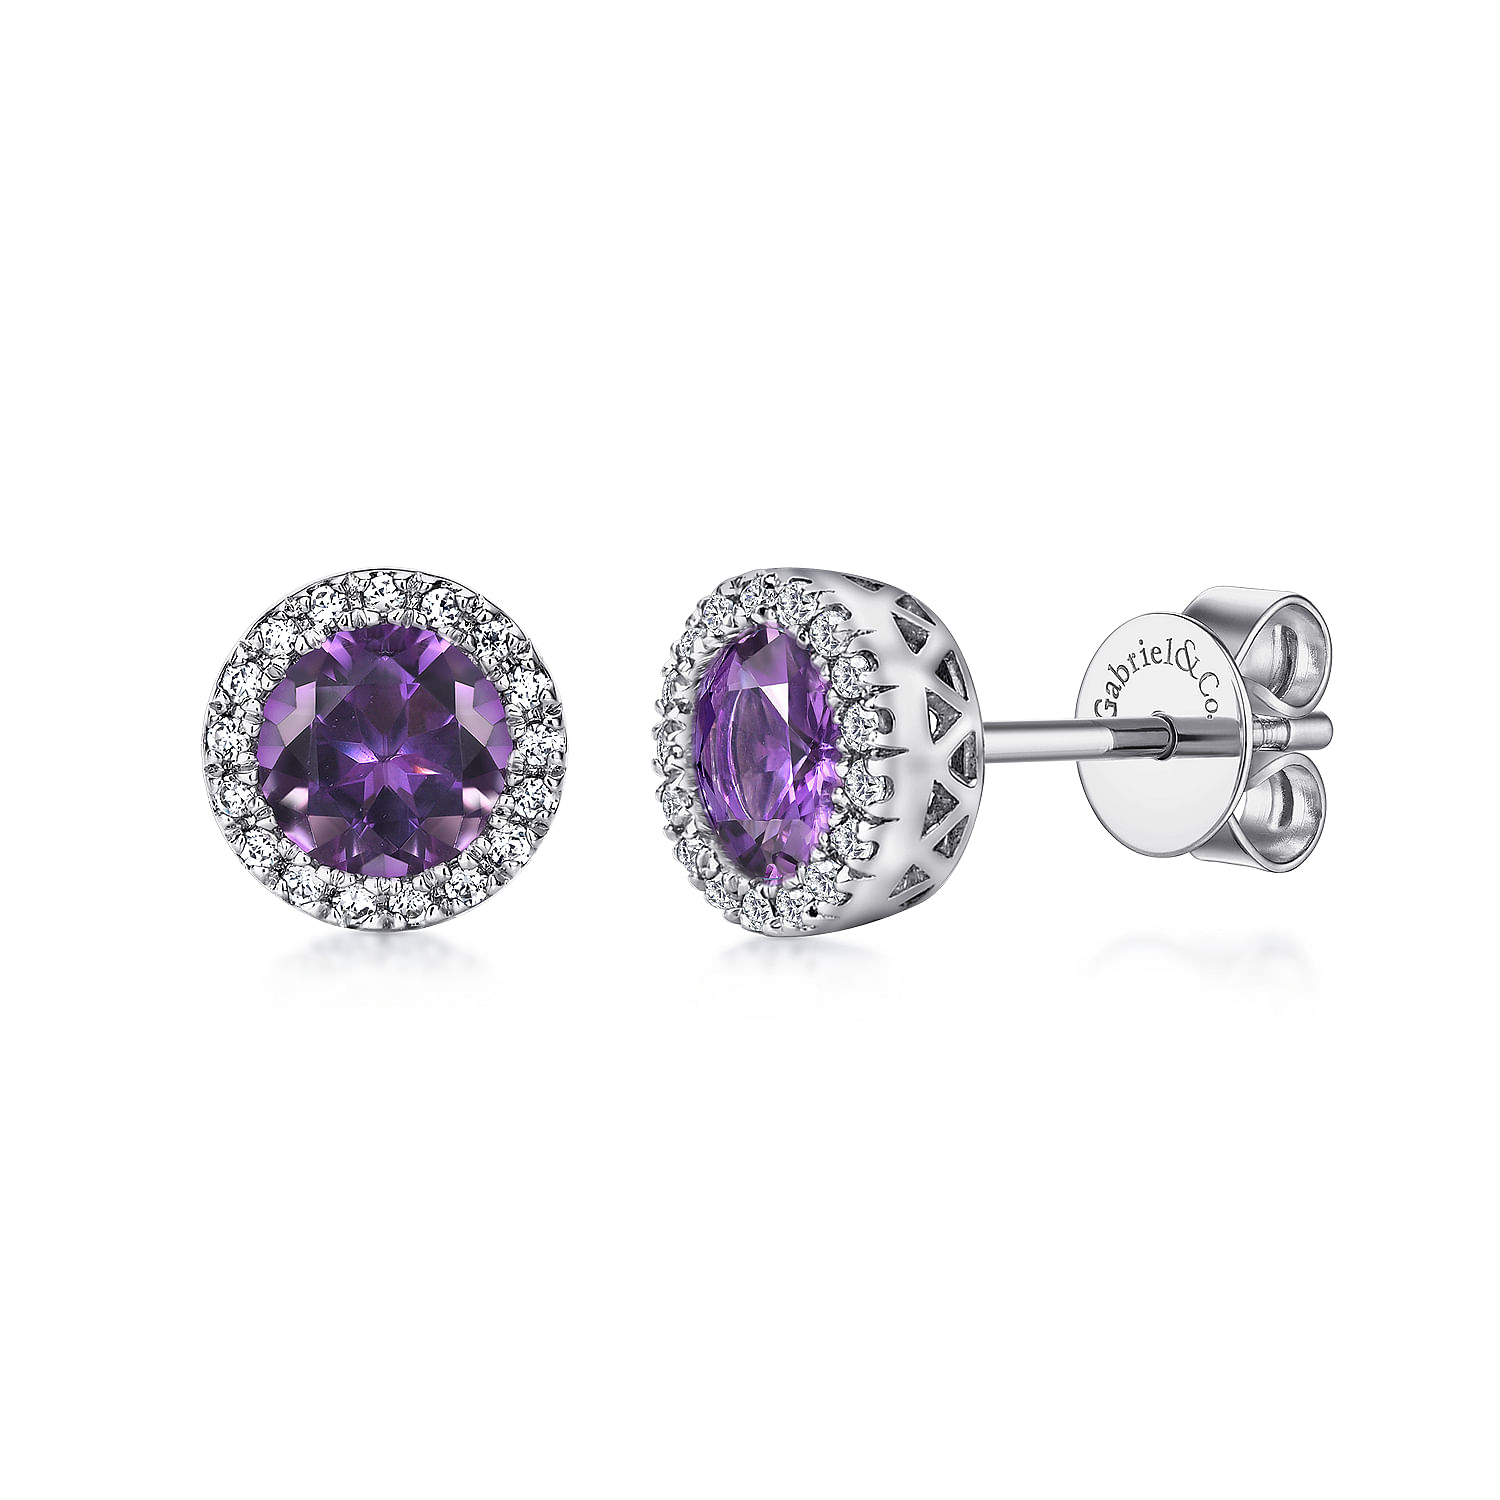 Gabriel - 14K White Gold Round Amethyst and Diamond Halo Stud Earrings